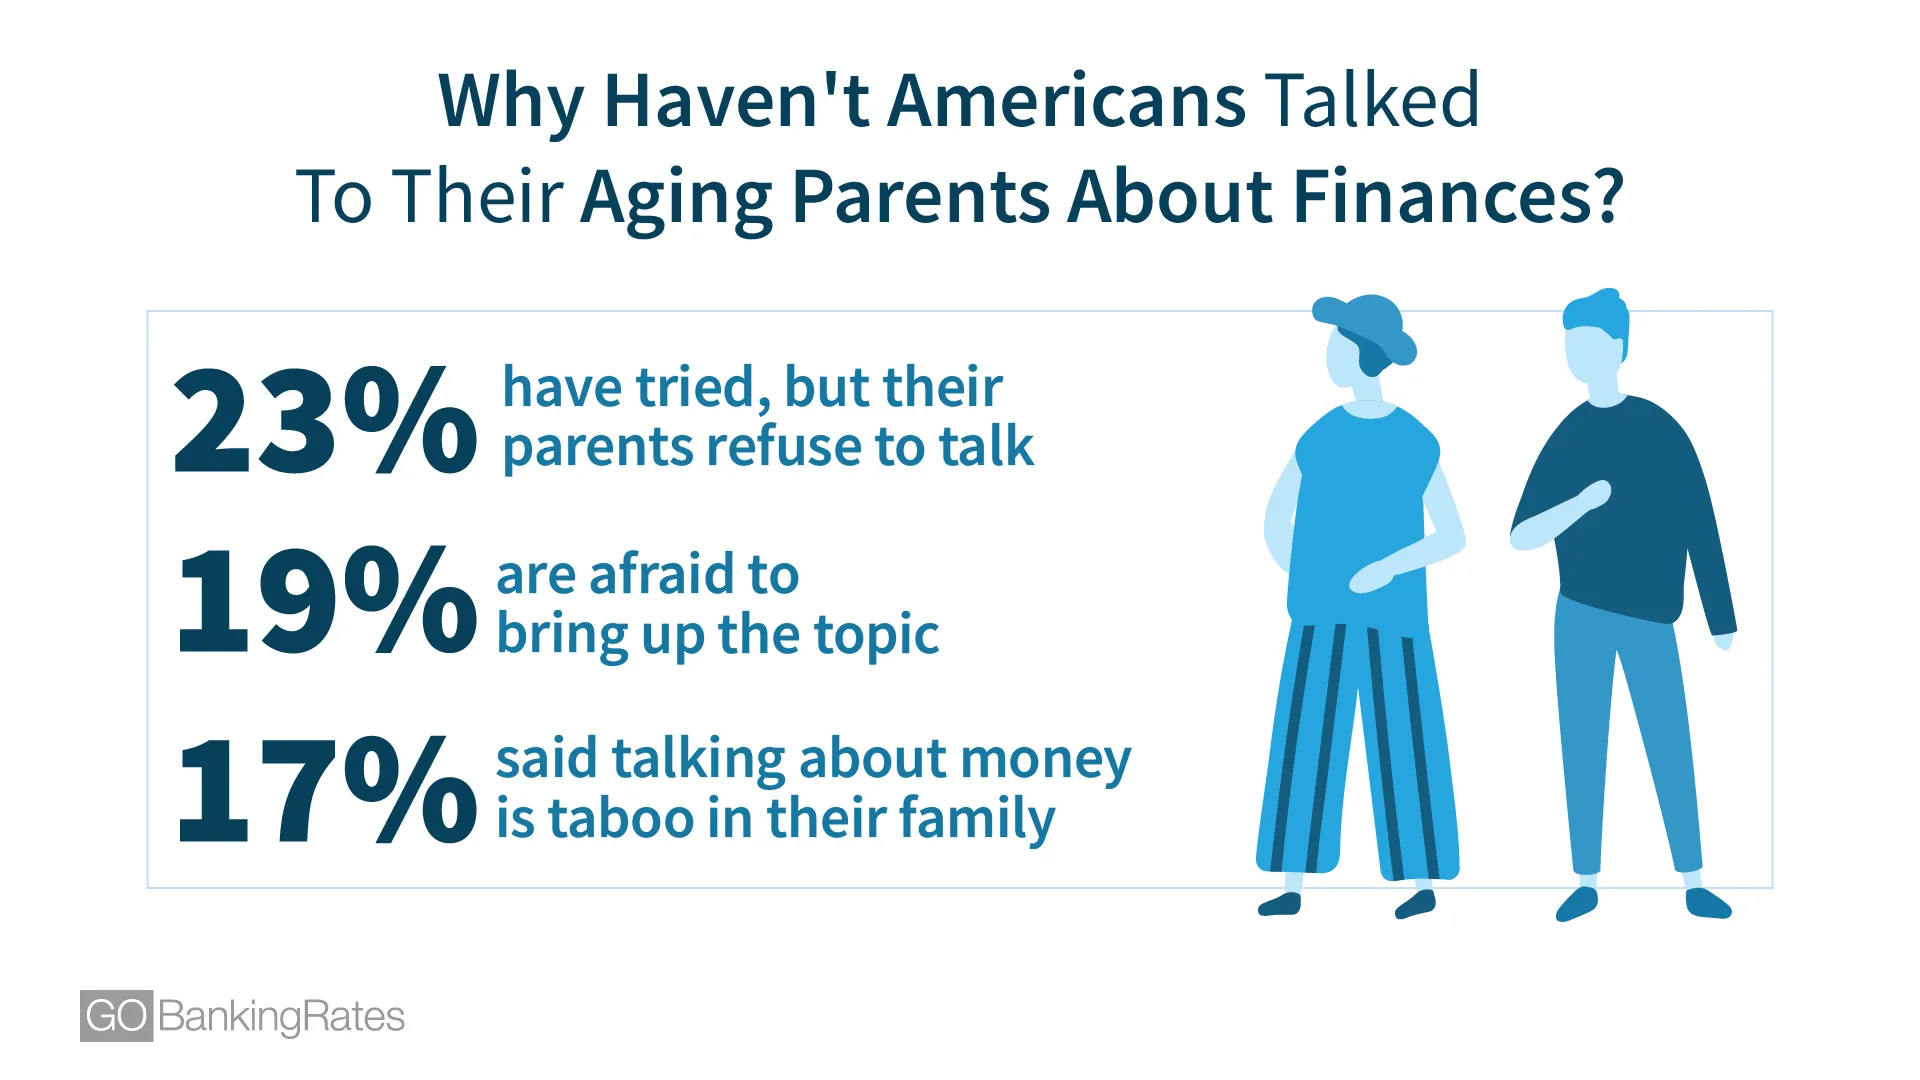 Why Haven't Americans Talked To Their Aging Parents About Finances?